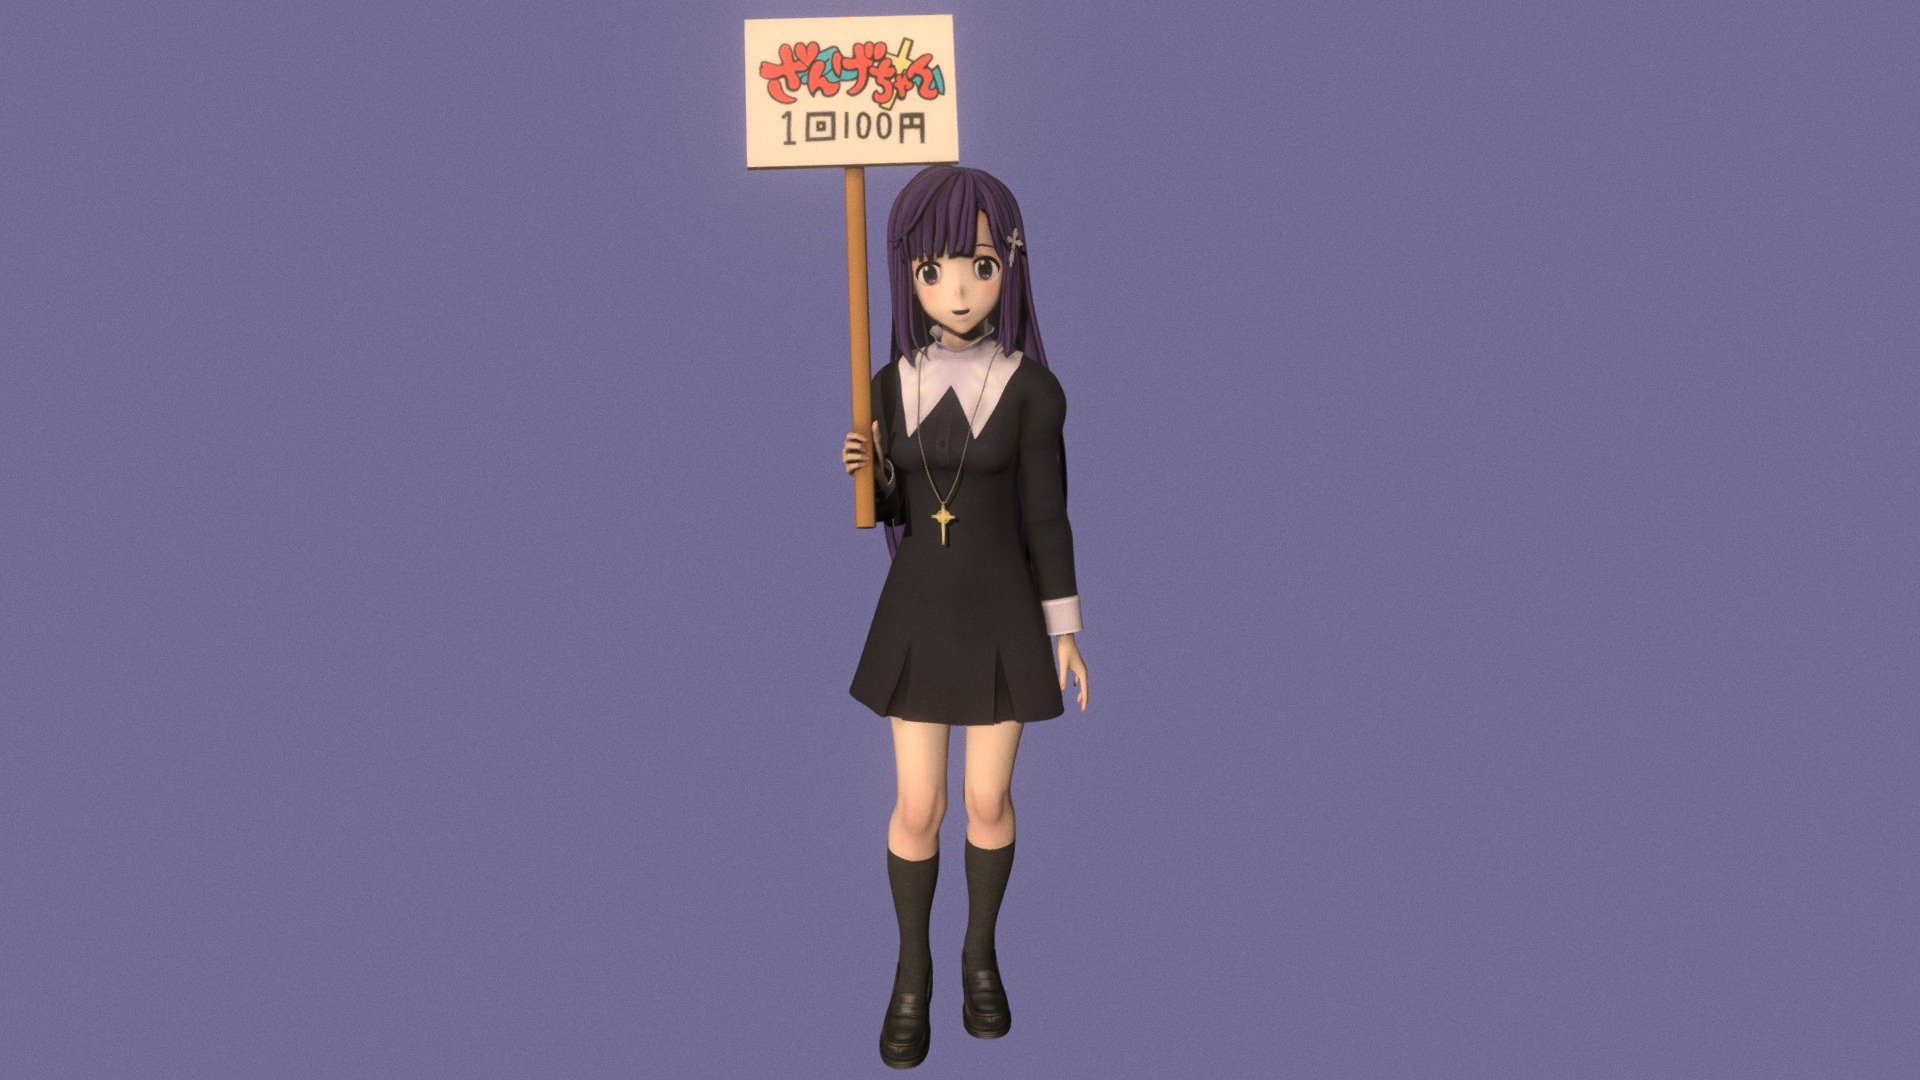 Posed model of anime girl Zange (Kannagi).

This product include .FBX (ver. 7200) and .MAX (ver. 2010) files.

Rigged version: https://sketchfab.com/3d-models/t-pose-rigged-model-of-zange-3b42ab36f97b4e11a787131aaab98f24

I support convert this 3D model to various file formats: 3DS; AI; ASE; DAE; DWF; DWG; DXF; FLT; HTR; IGS; M3G; MQO; OBJ; SAT; STL; W3D; WRL; X.

You can buy all of my models in one pack to save cost: https://sketchfab.com/3d-models/all-of-my-anime-girls-c5a56156994e4193b9e8fa21a3b8360b

And I can make commission models.

If you have any questions, please leave a comment.

If you have any questions, please leave a comment or contact me via my email 3d.eden.project@gmail.com 3d model